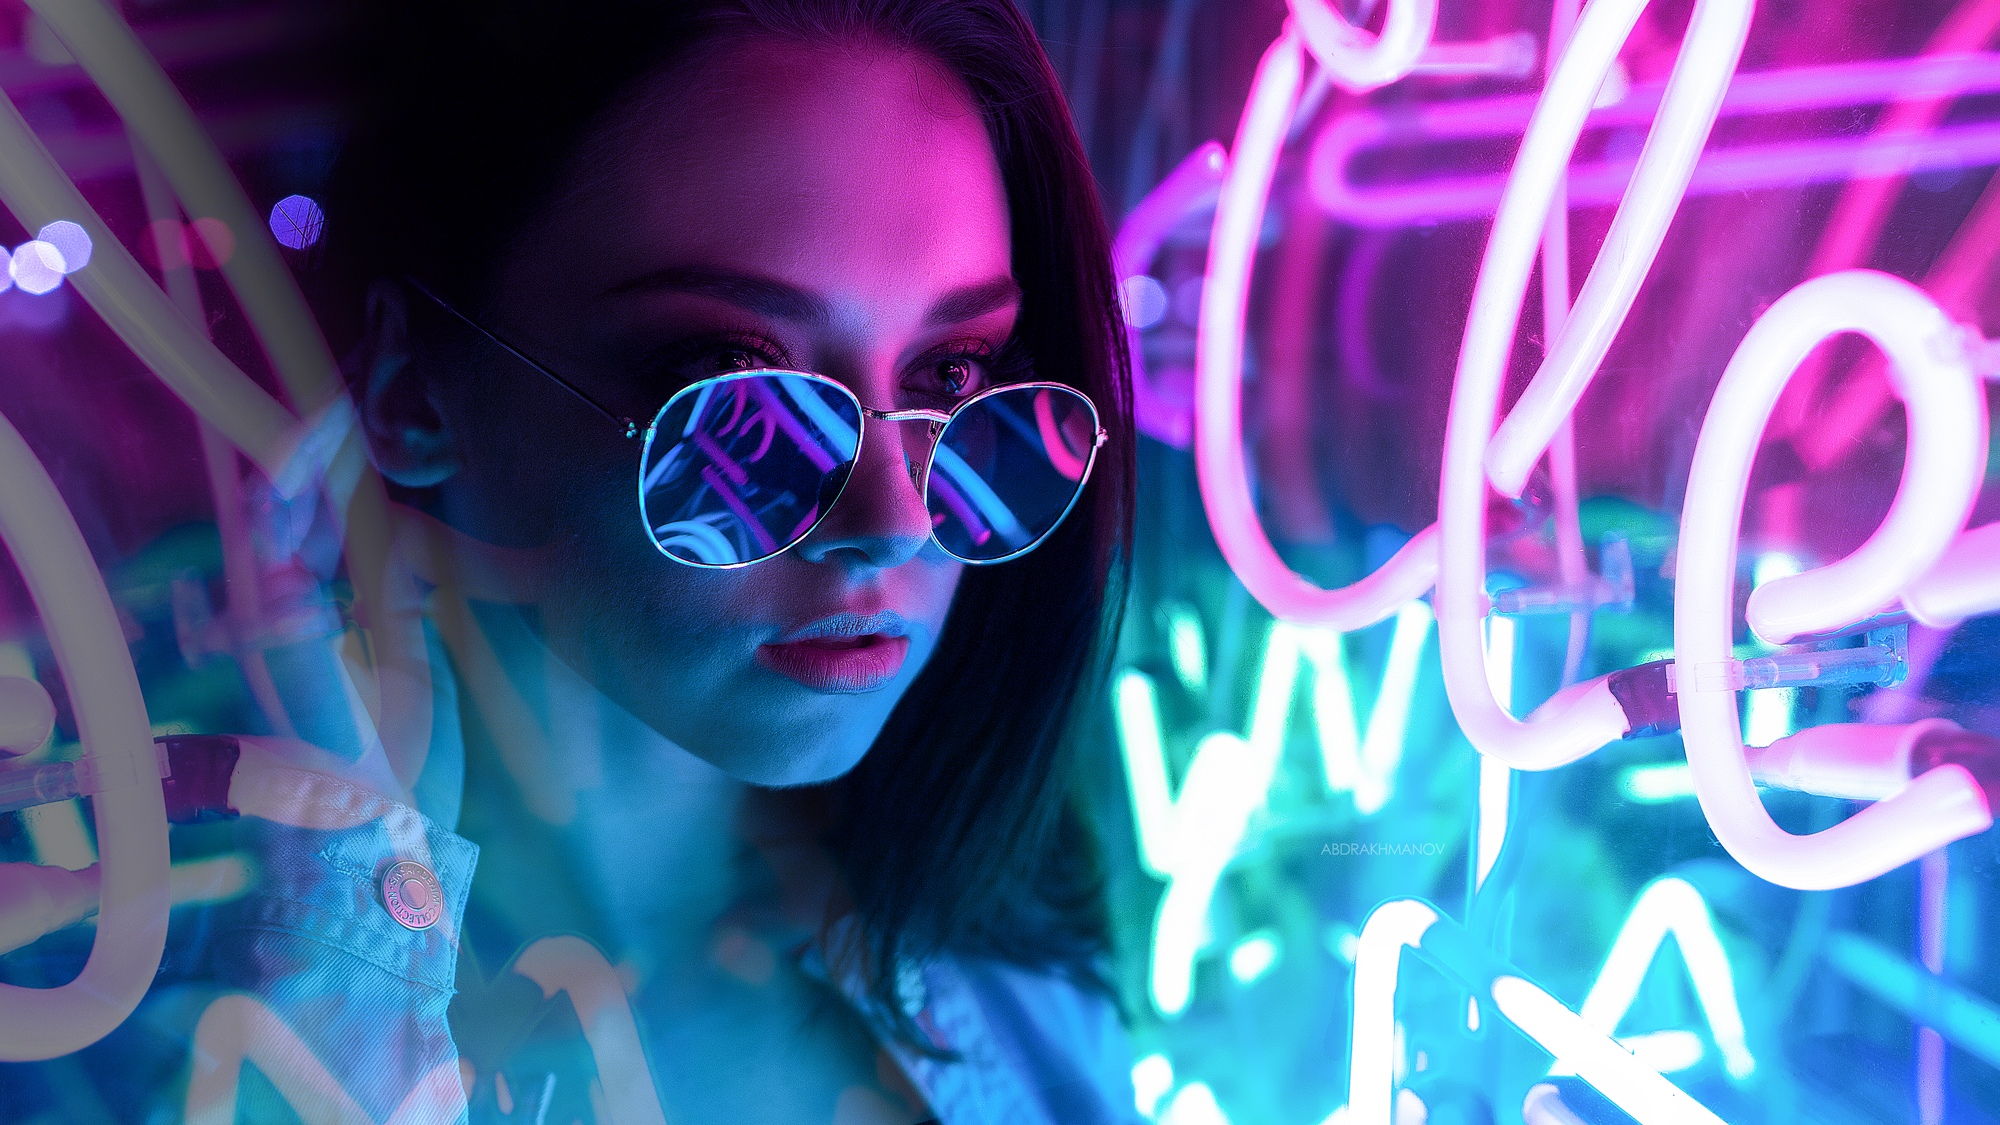 People 2000x1125 women model portrait face women with shades looking into the distance neon cyan pink